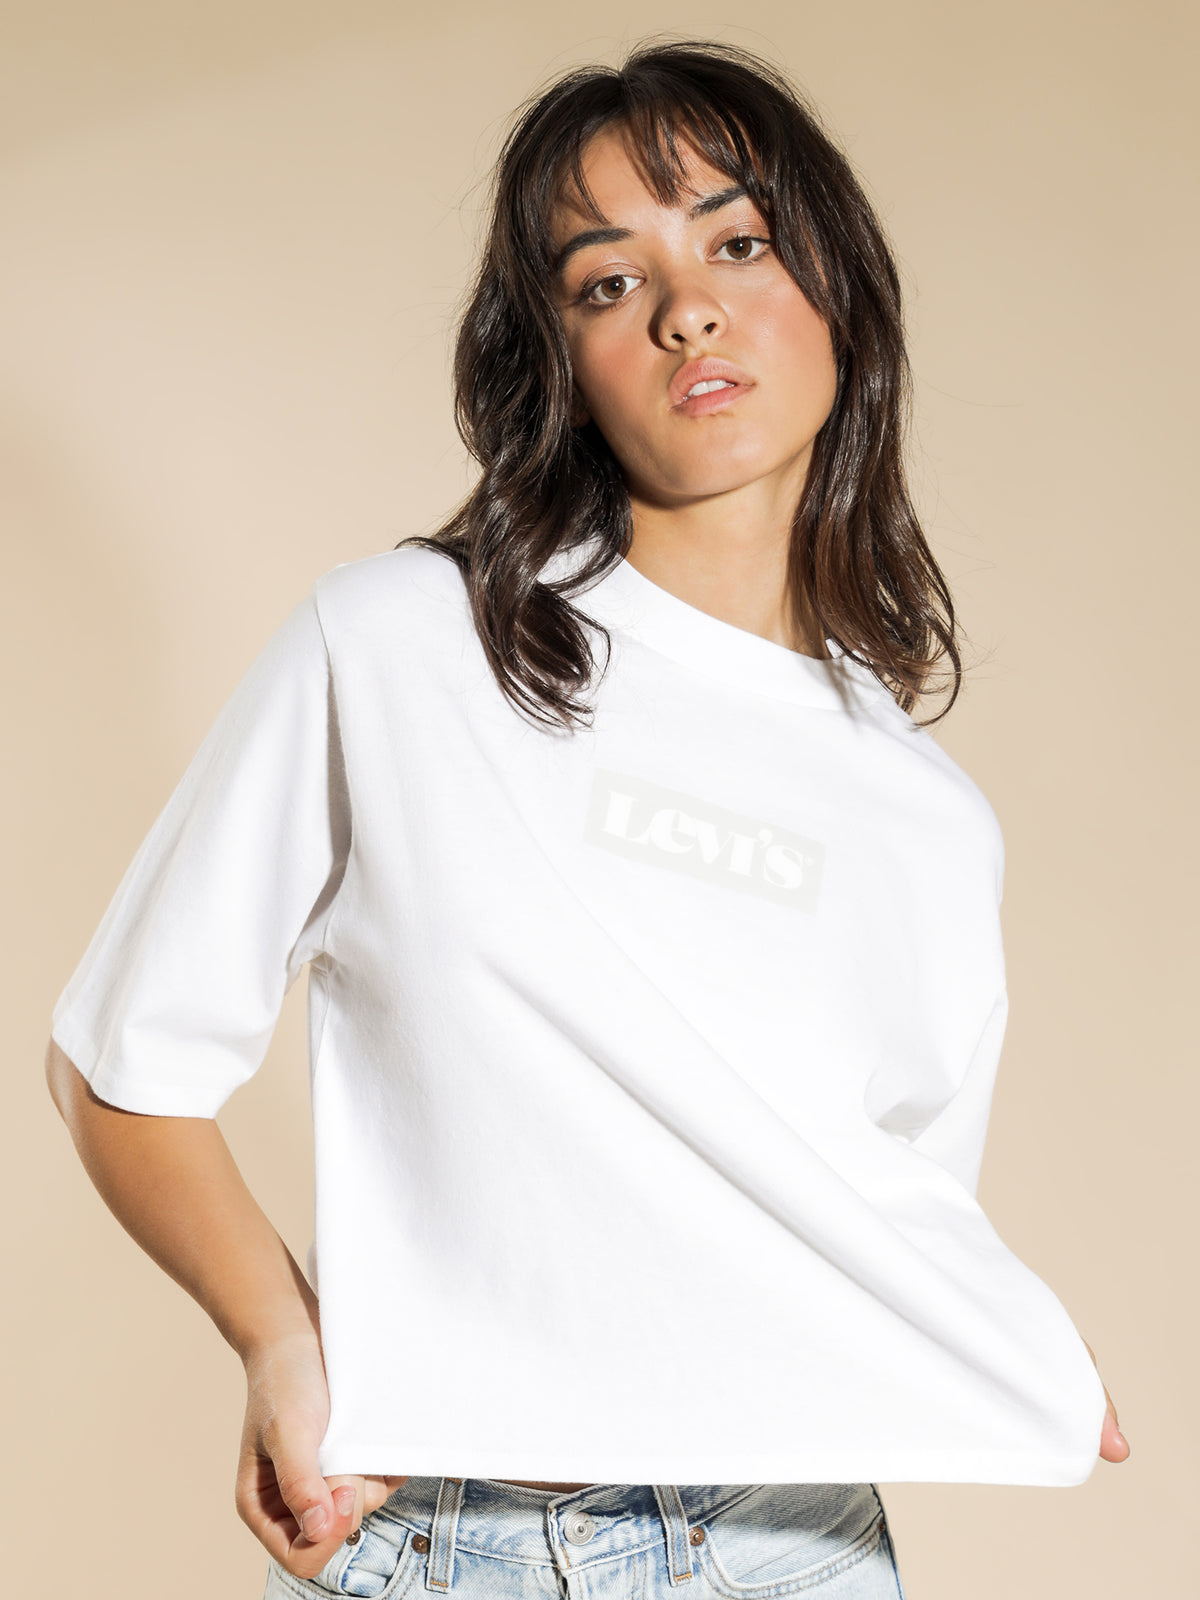 Boxy T-Shirt in White